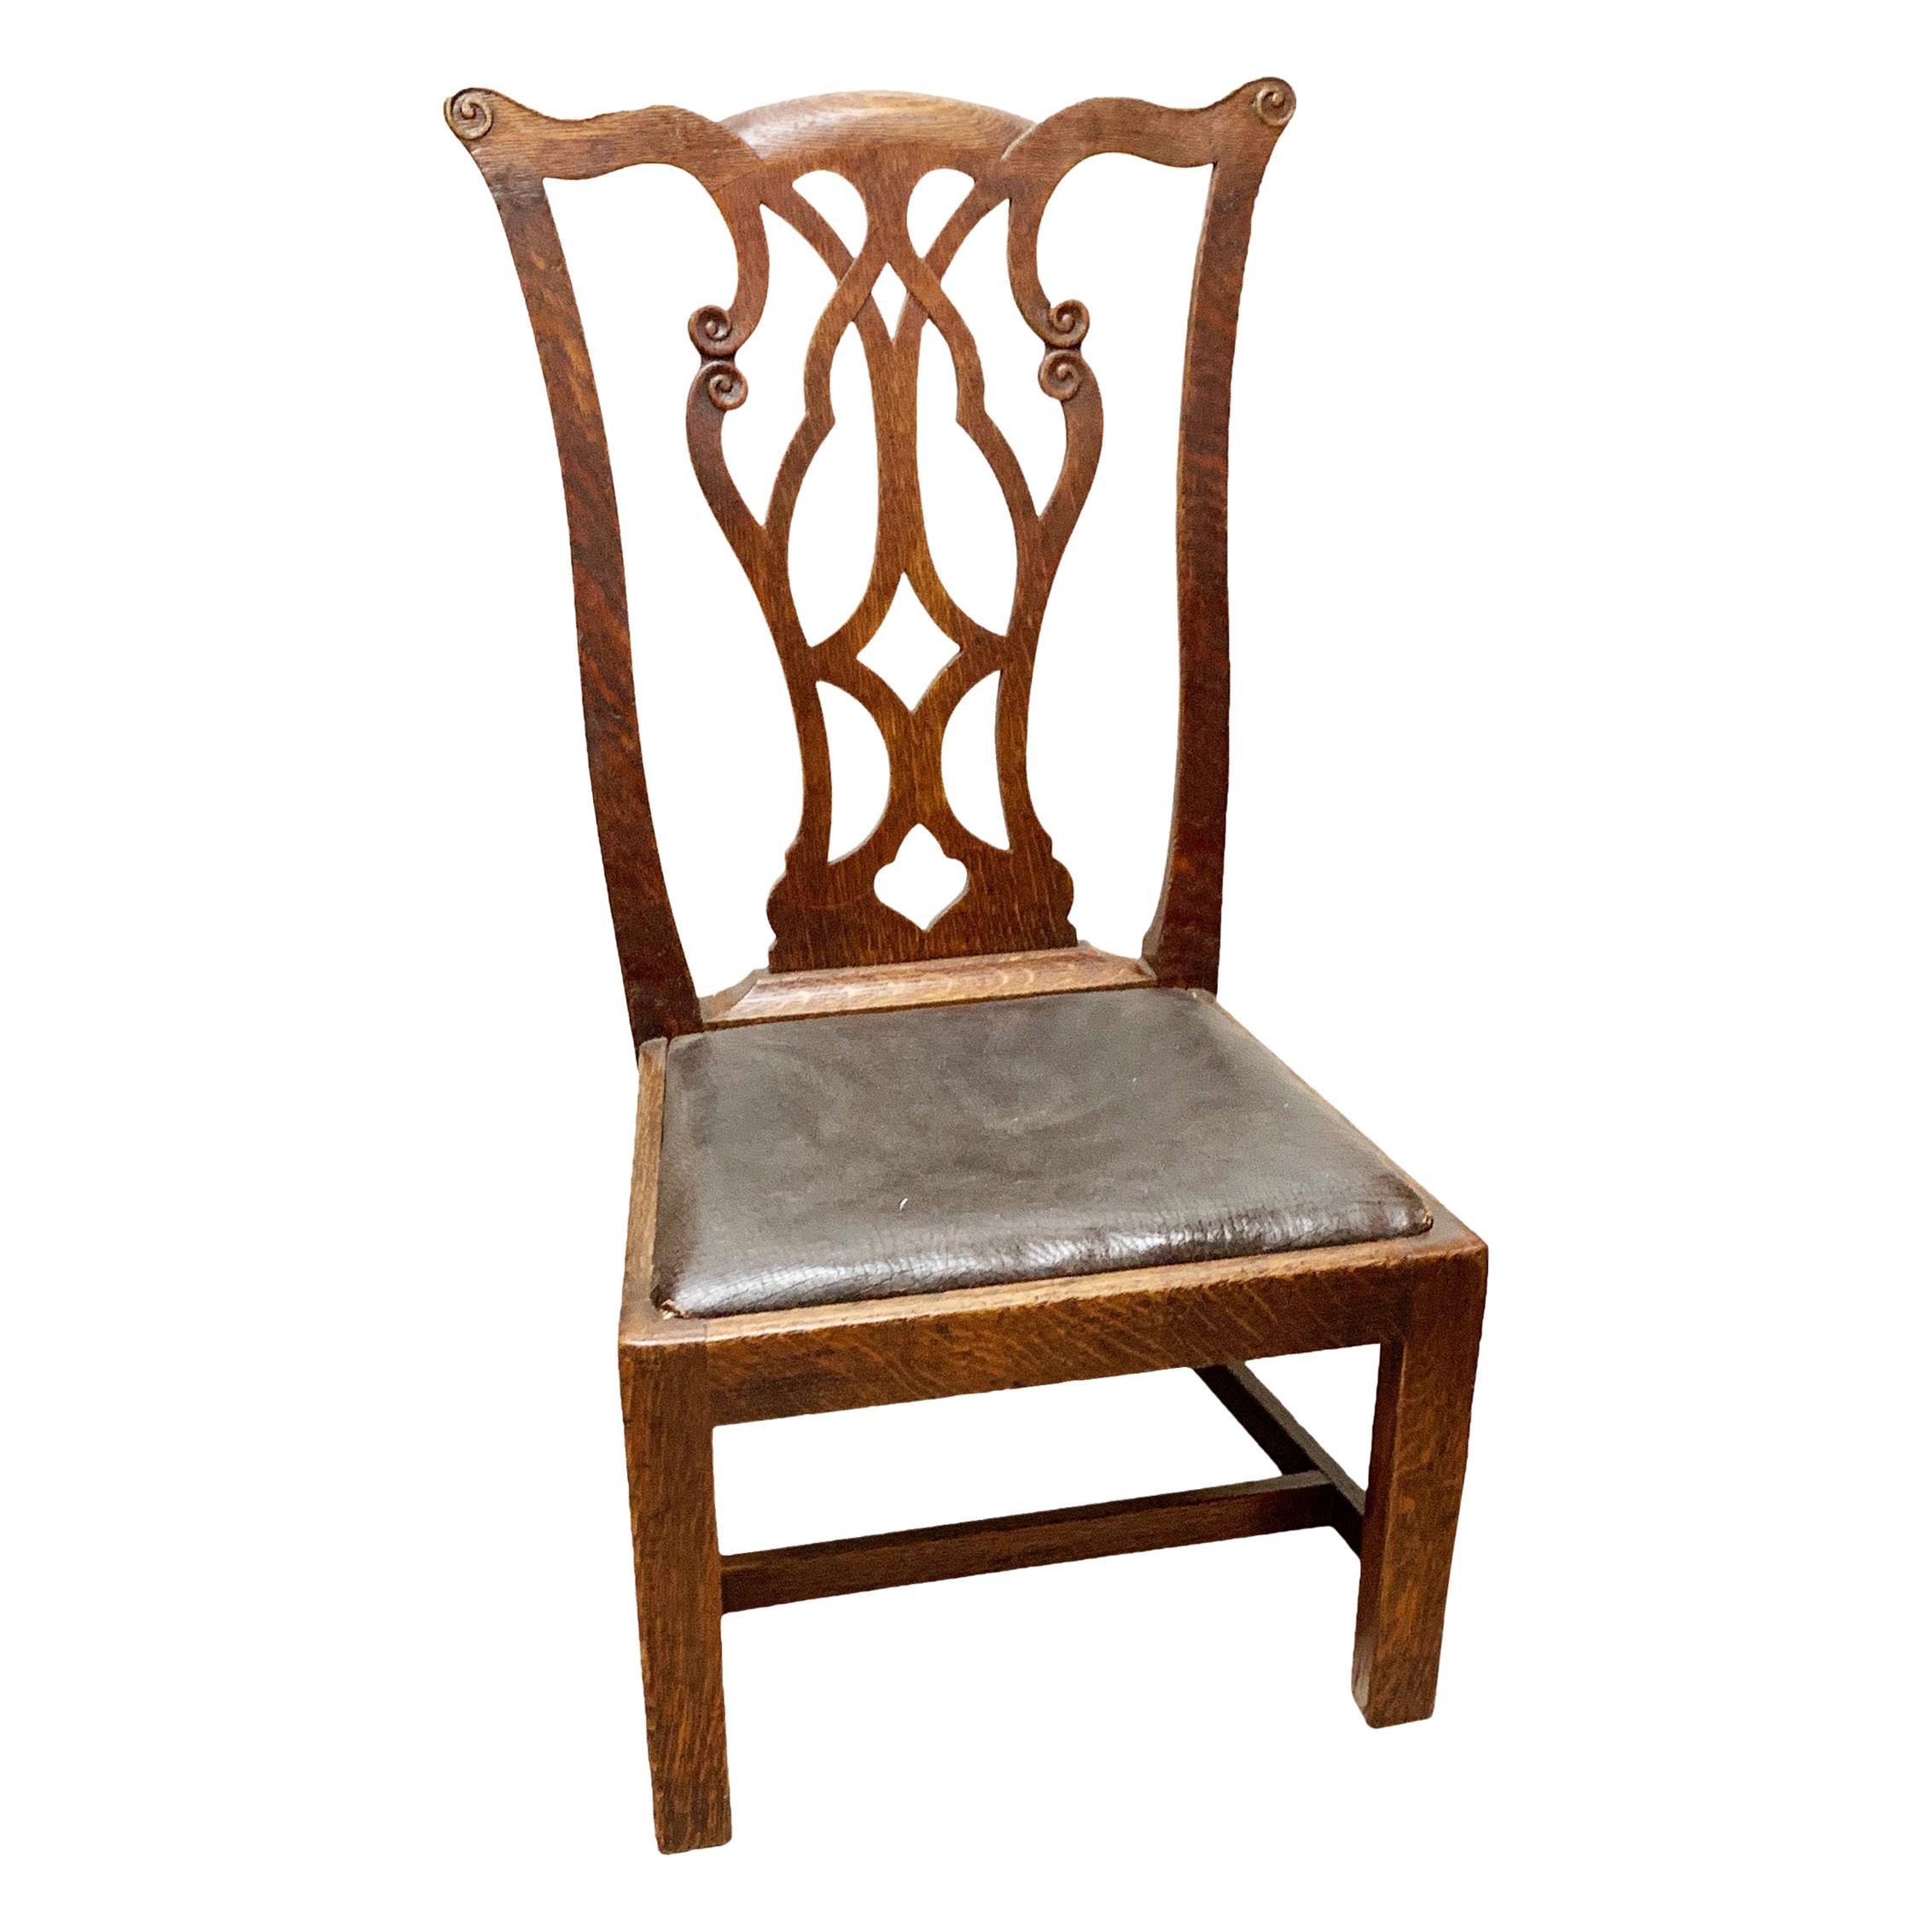 19th Century Antique Oak Hepplewhite Style Childs Chair For Sale